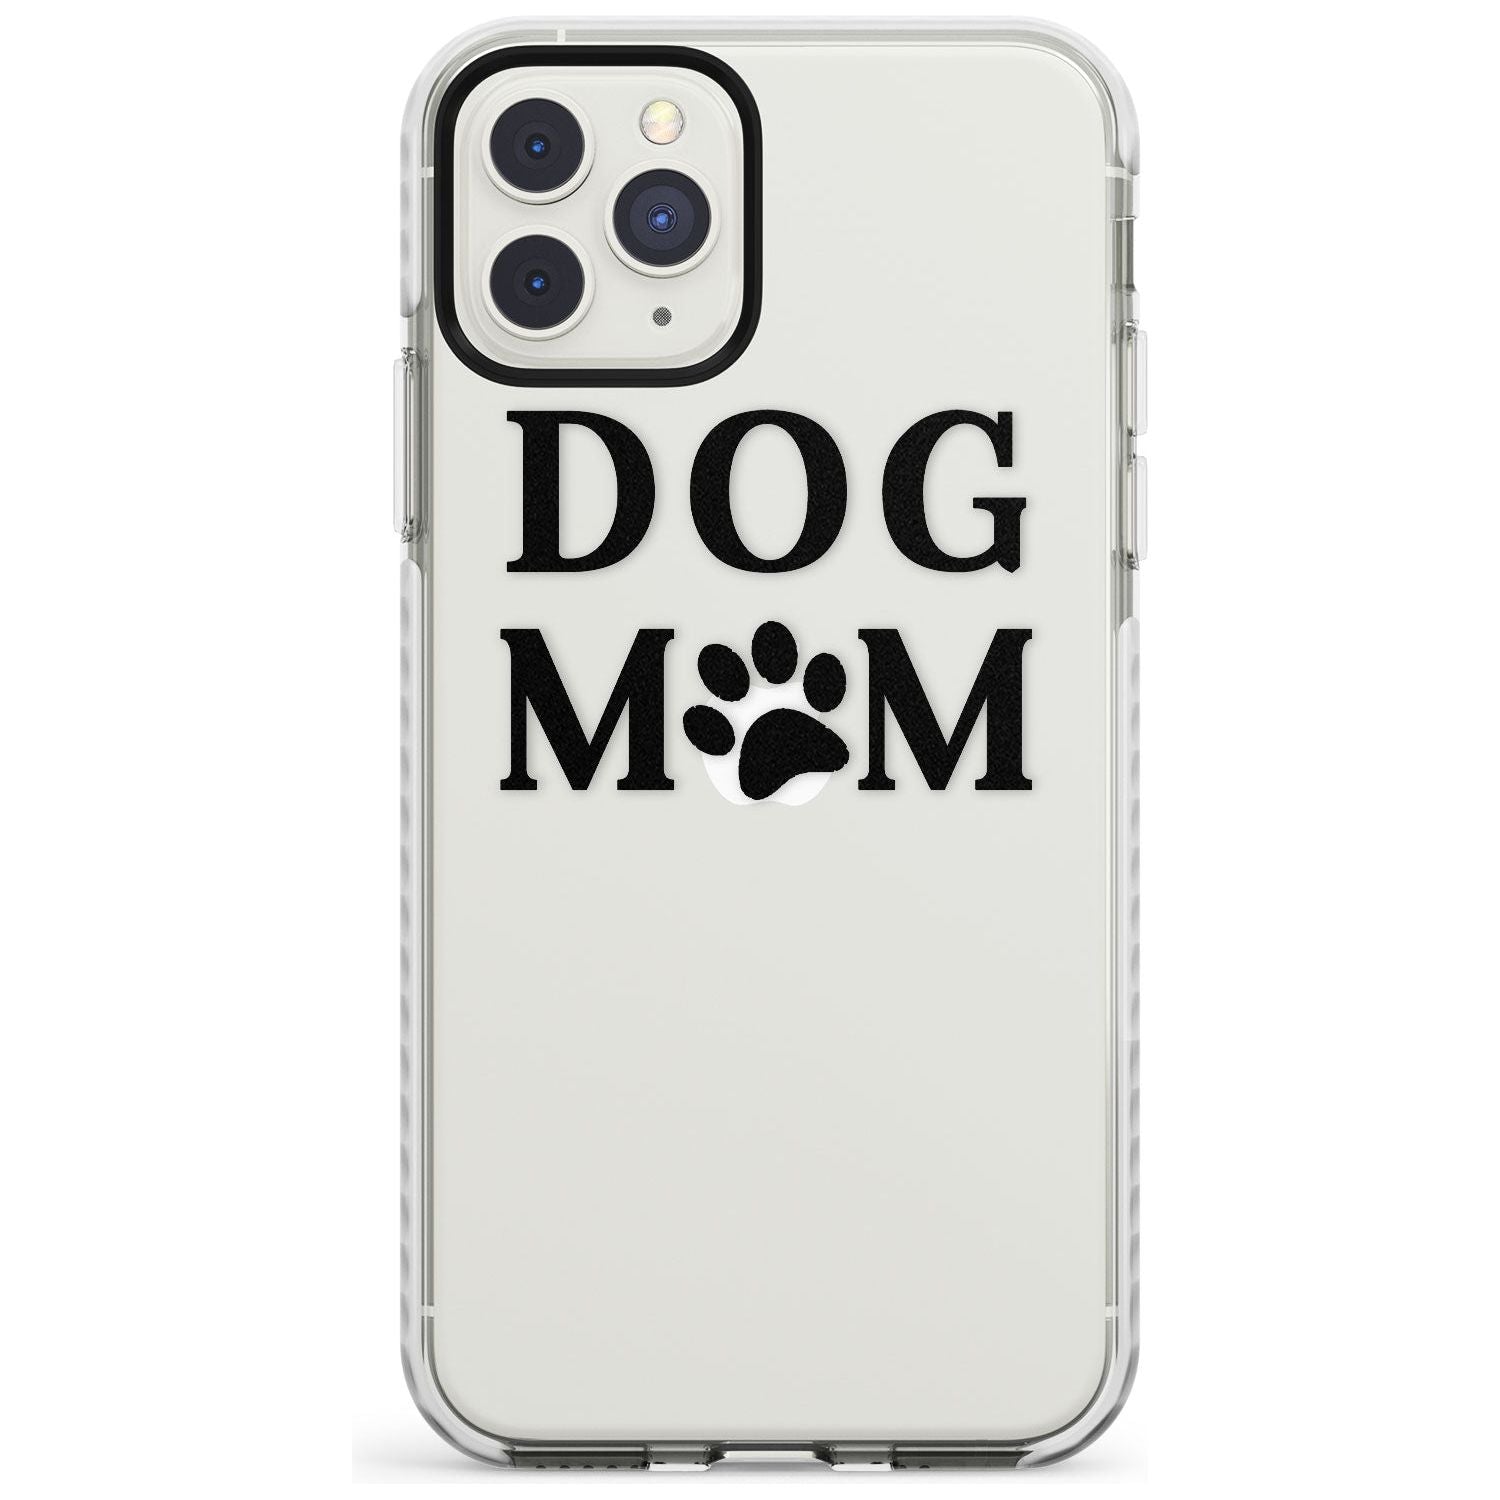 Dog Mom Paw Print Impact Phone Case for iPhone 11 Pro Max